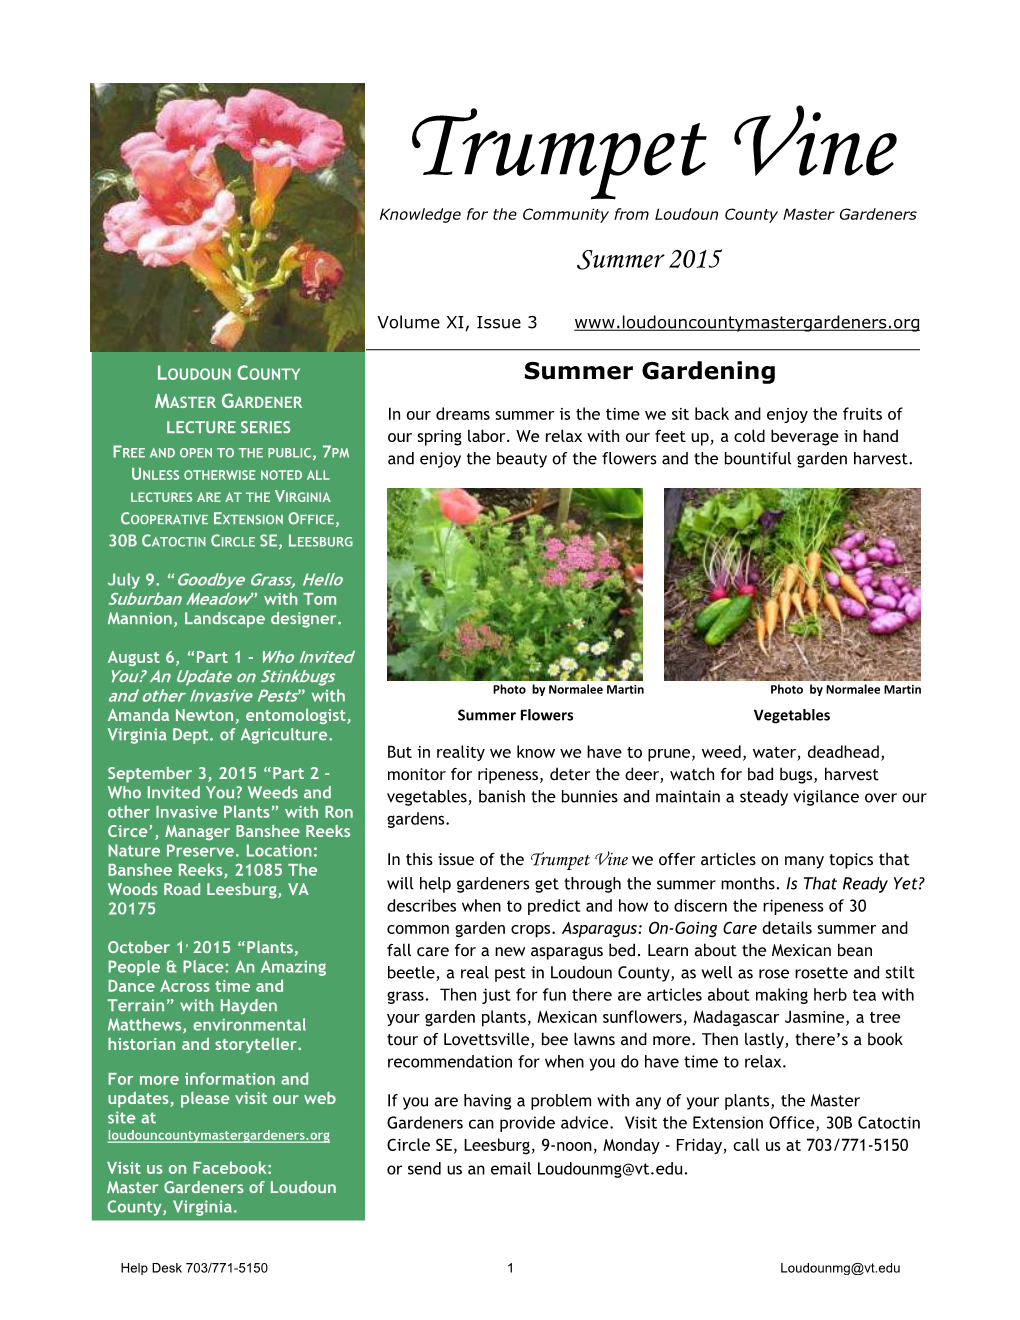 Trumpet Vine Knowledge for the Community from Loudoun County Master Gardeners Summer 2015